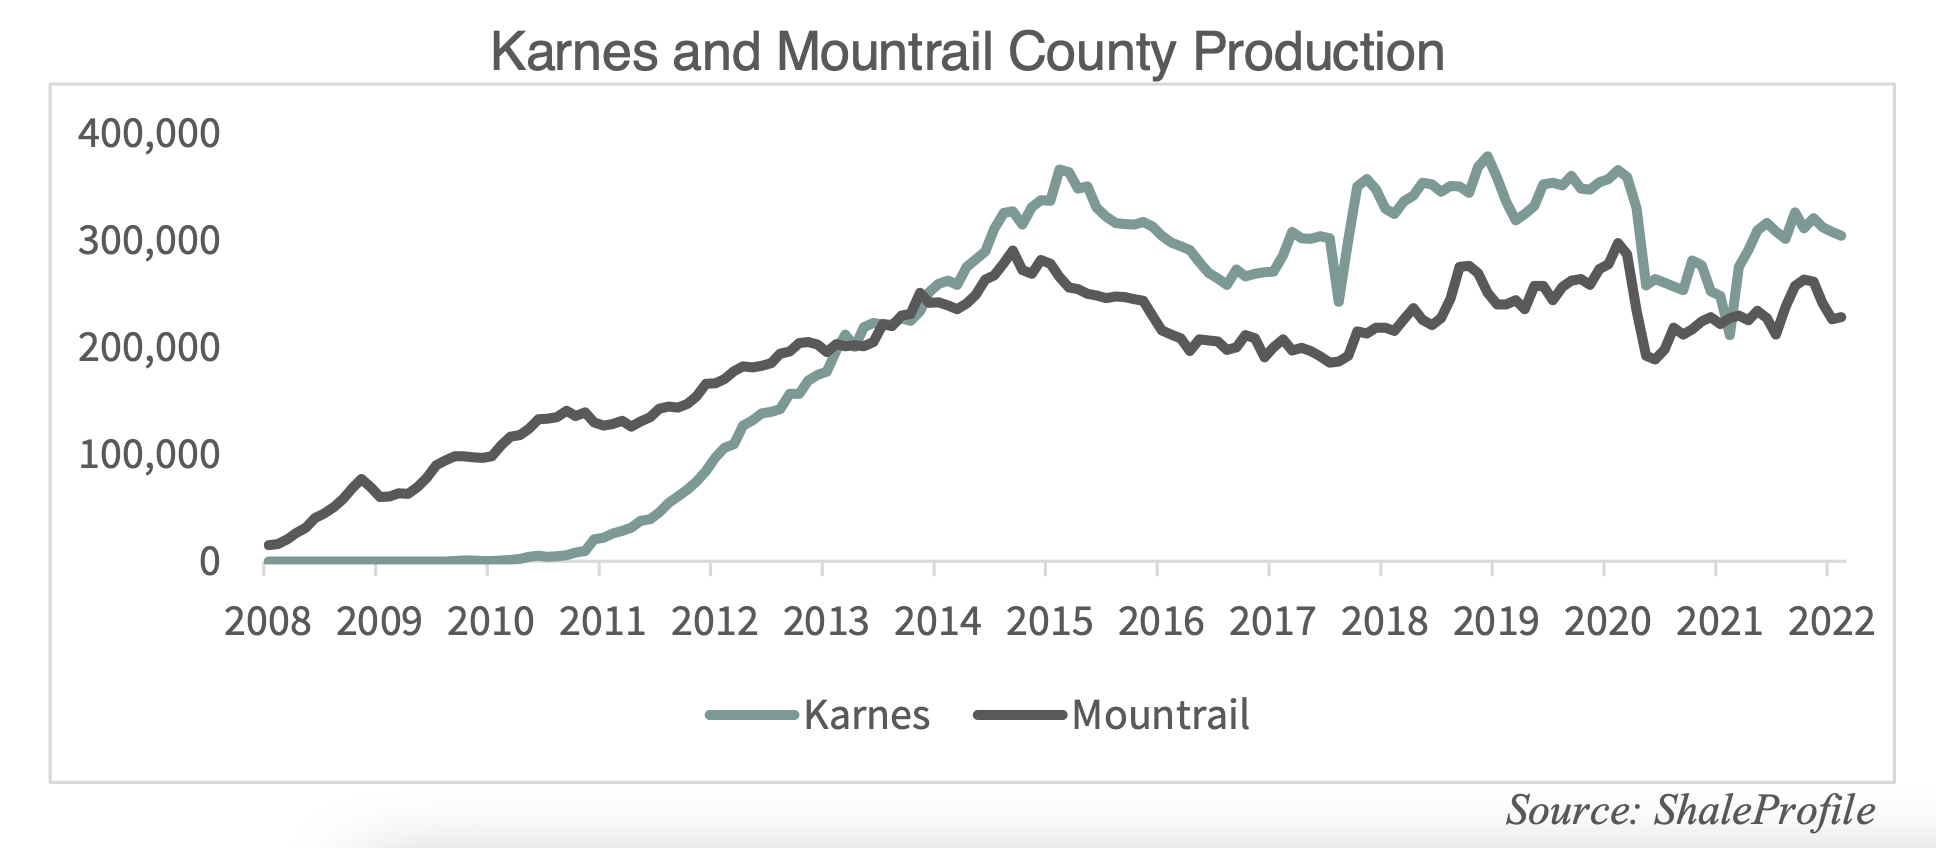 GR Blog #319 - Karnes and Mountrail County Production